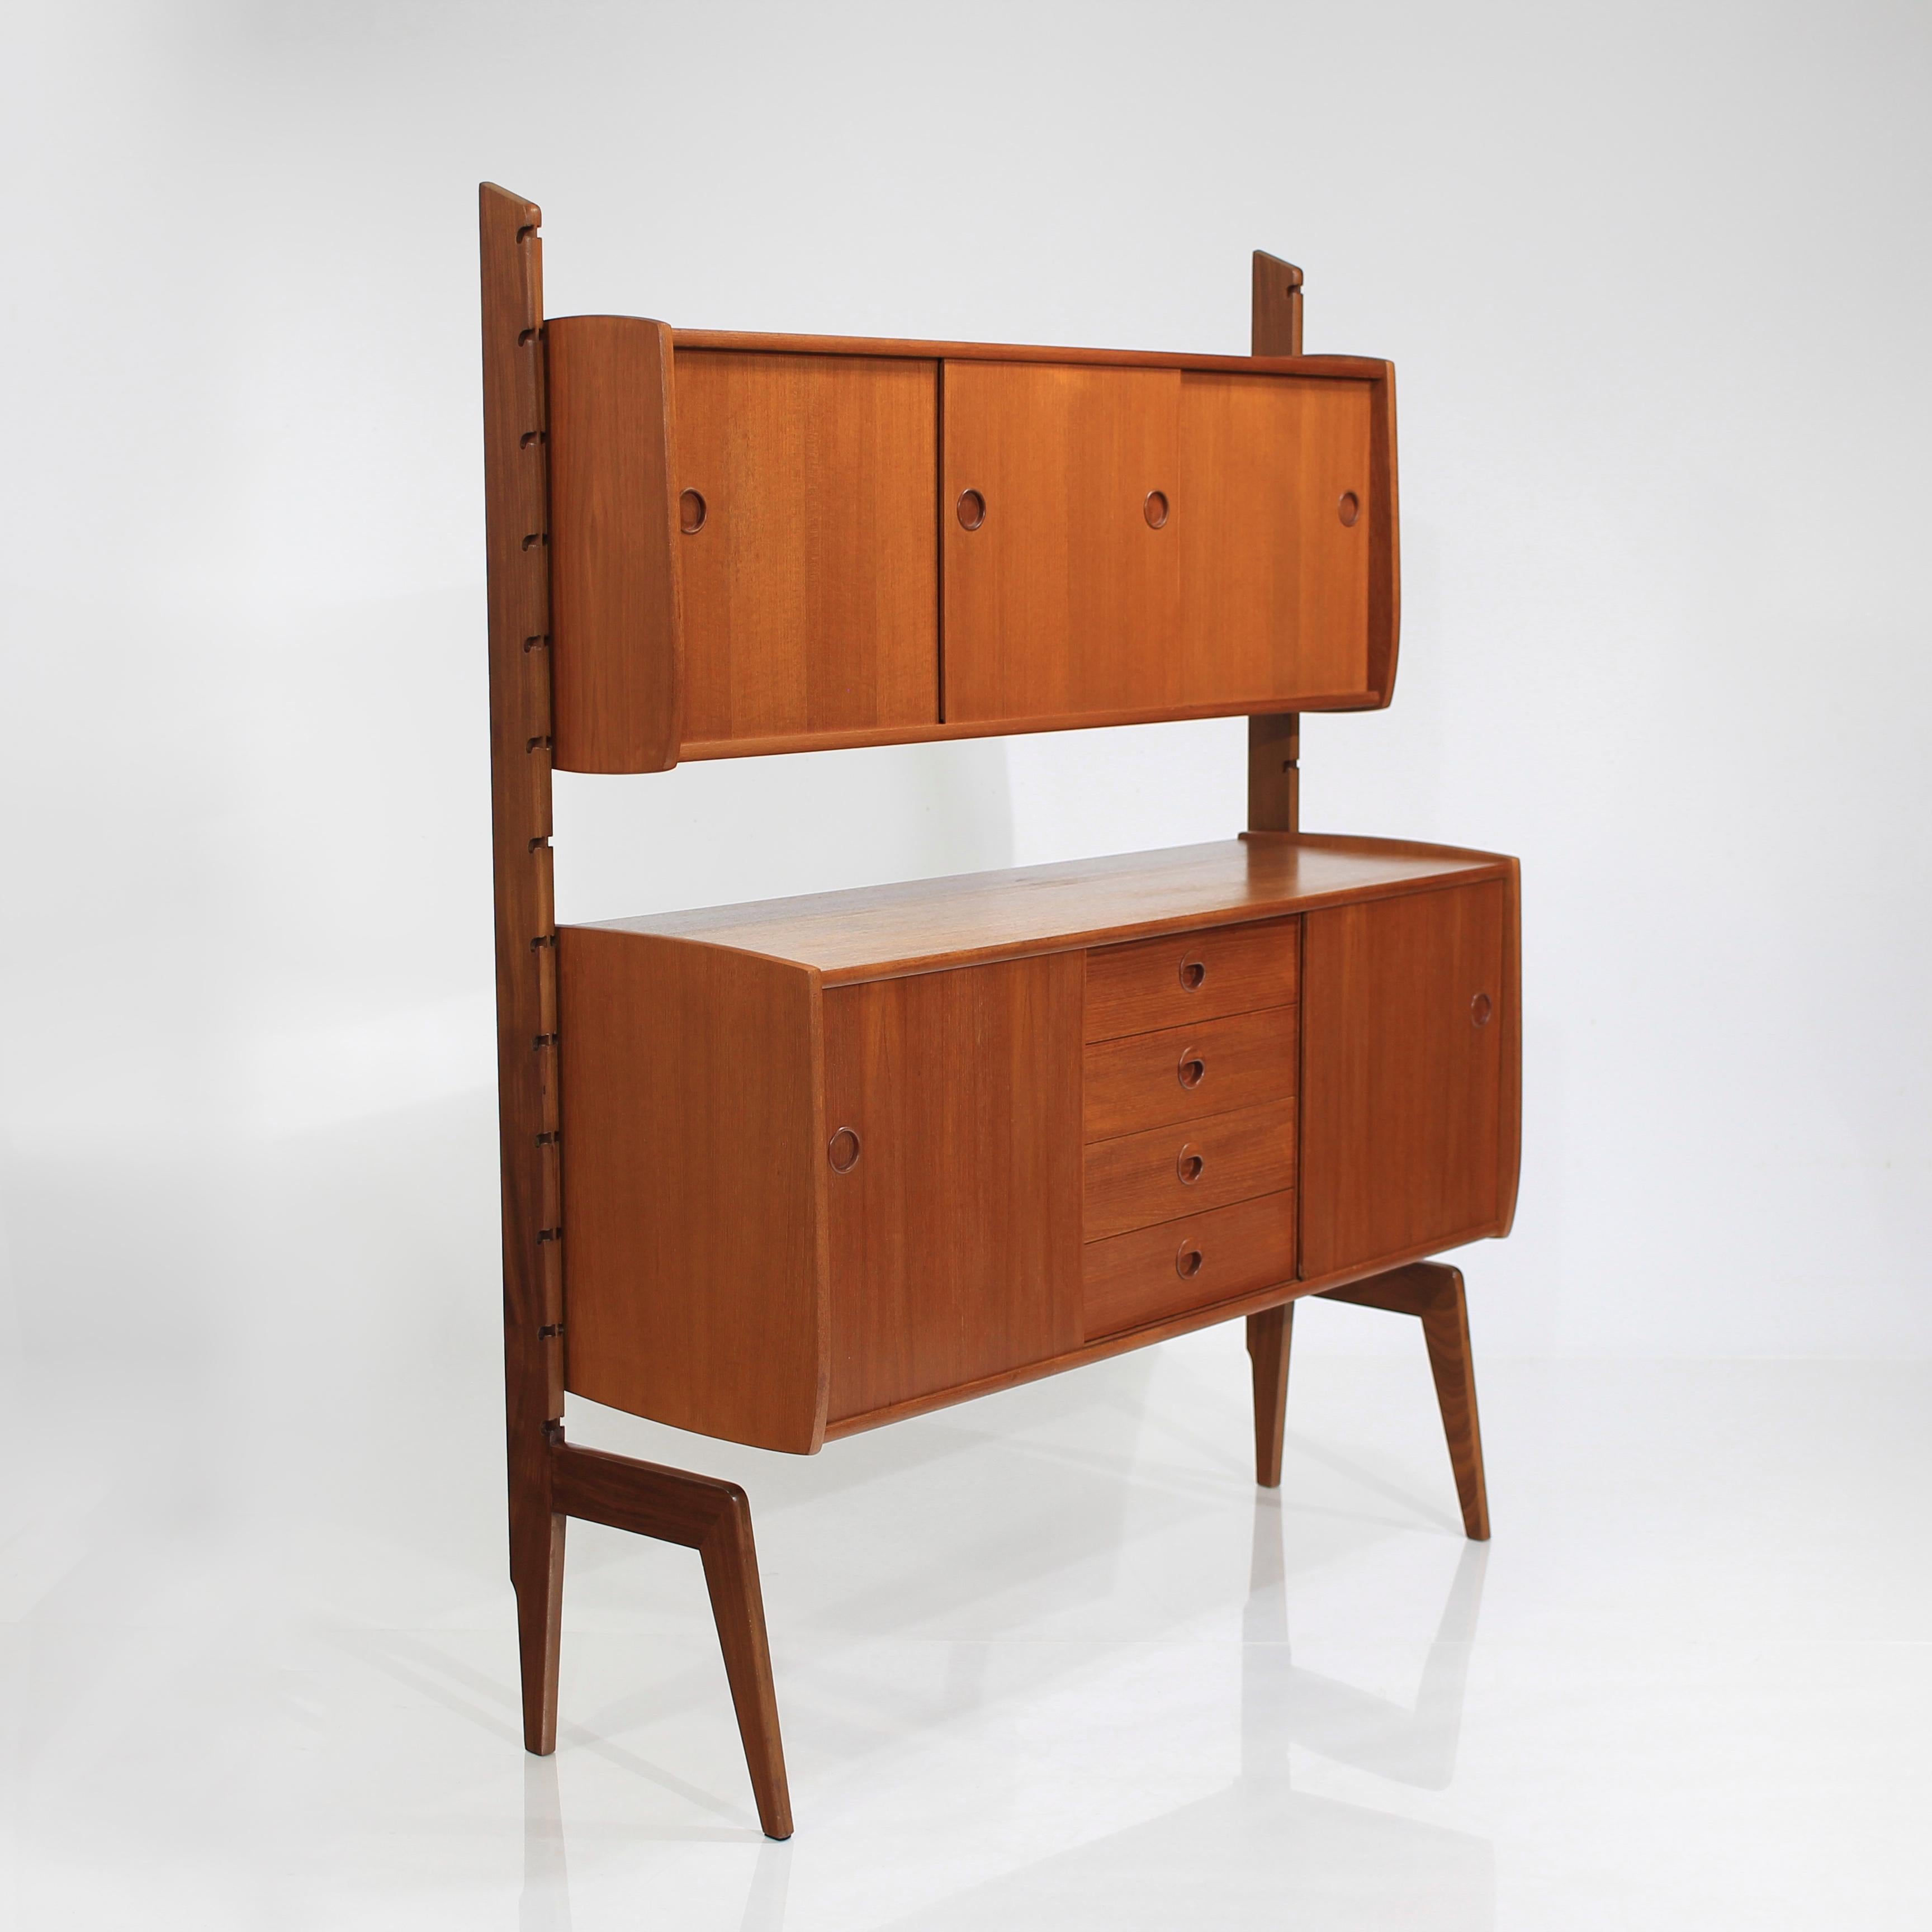 About this vintage free standing mid century Scandinavian bookcase:

This Teak Freestanding Ergo wall unit by John Texmon and Einar Blindheim for Blindheim Møbelfabrik is such a versatile piece.

With it's striking design and aged teak wood,